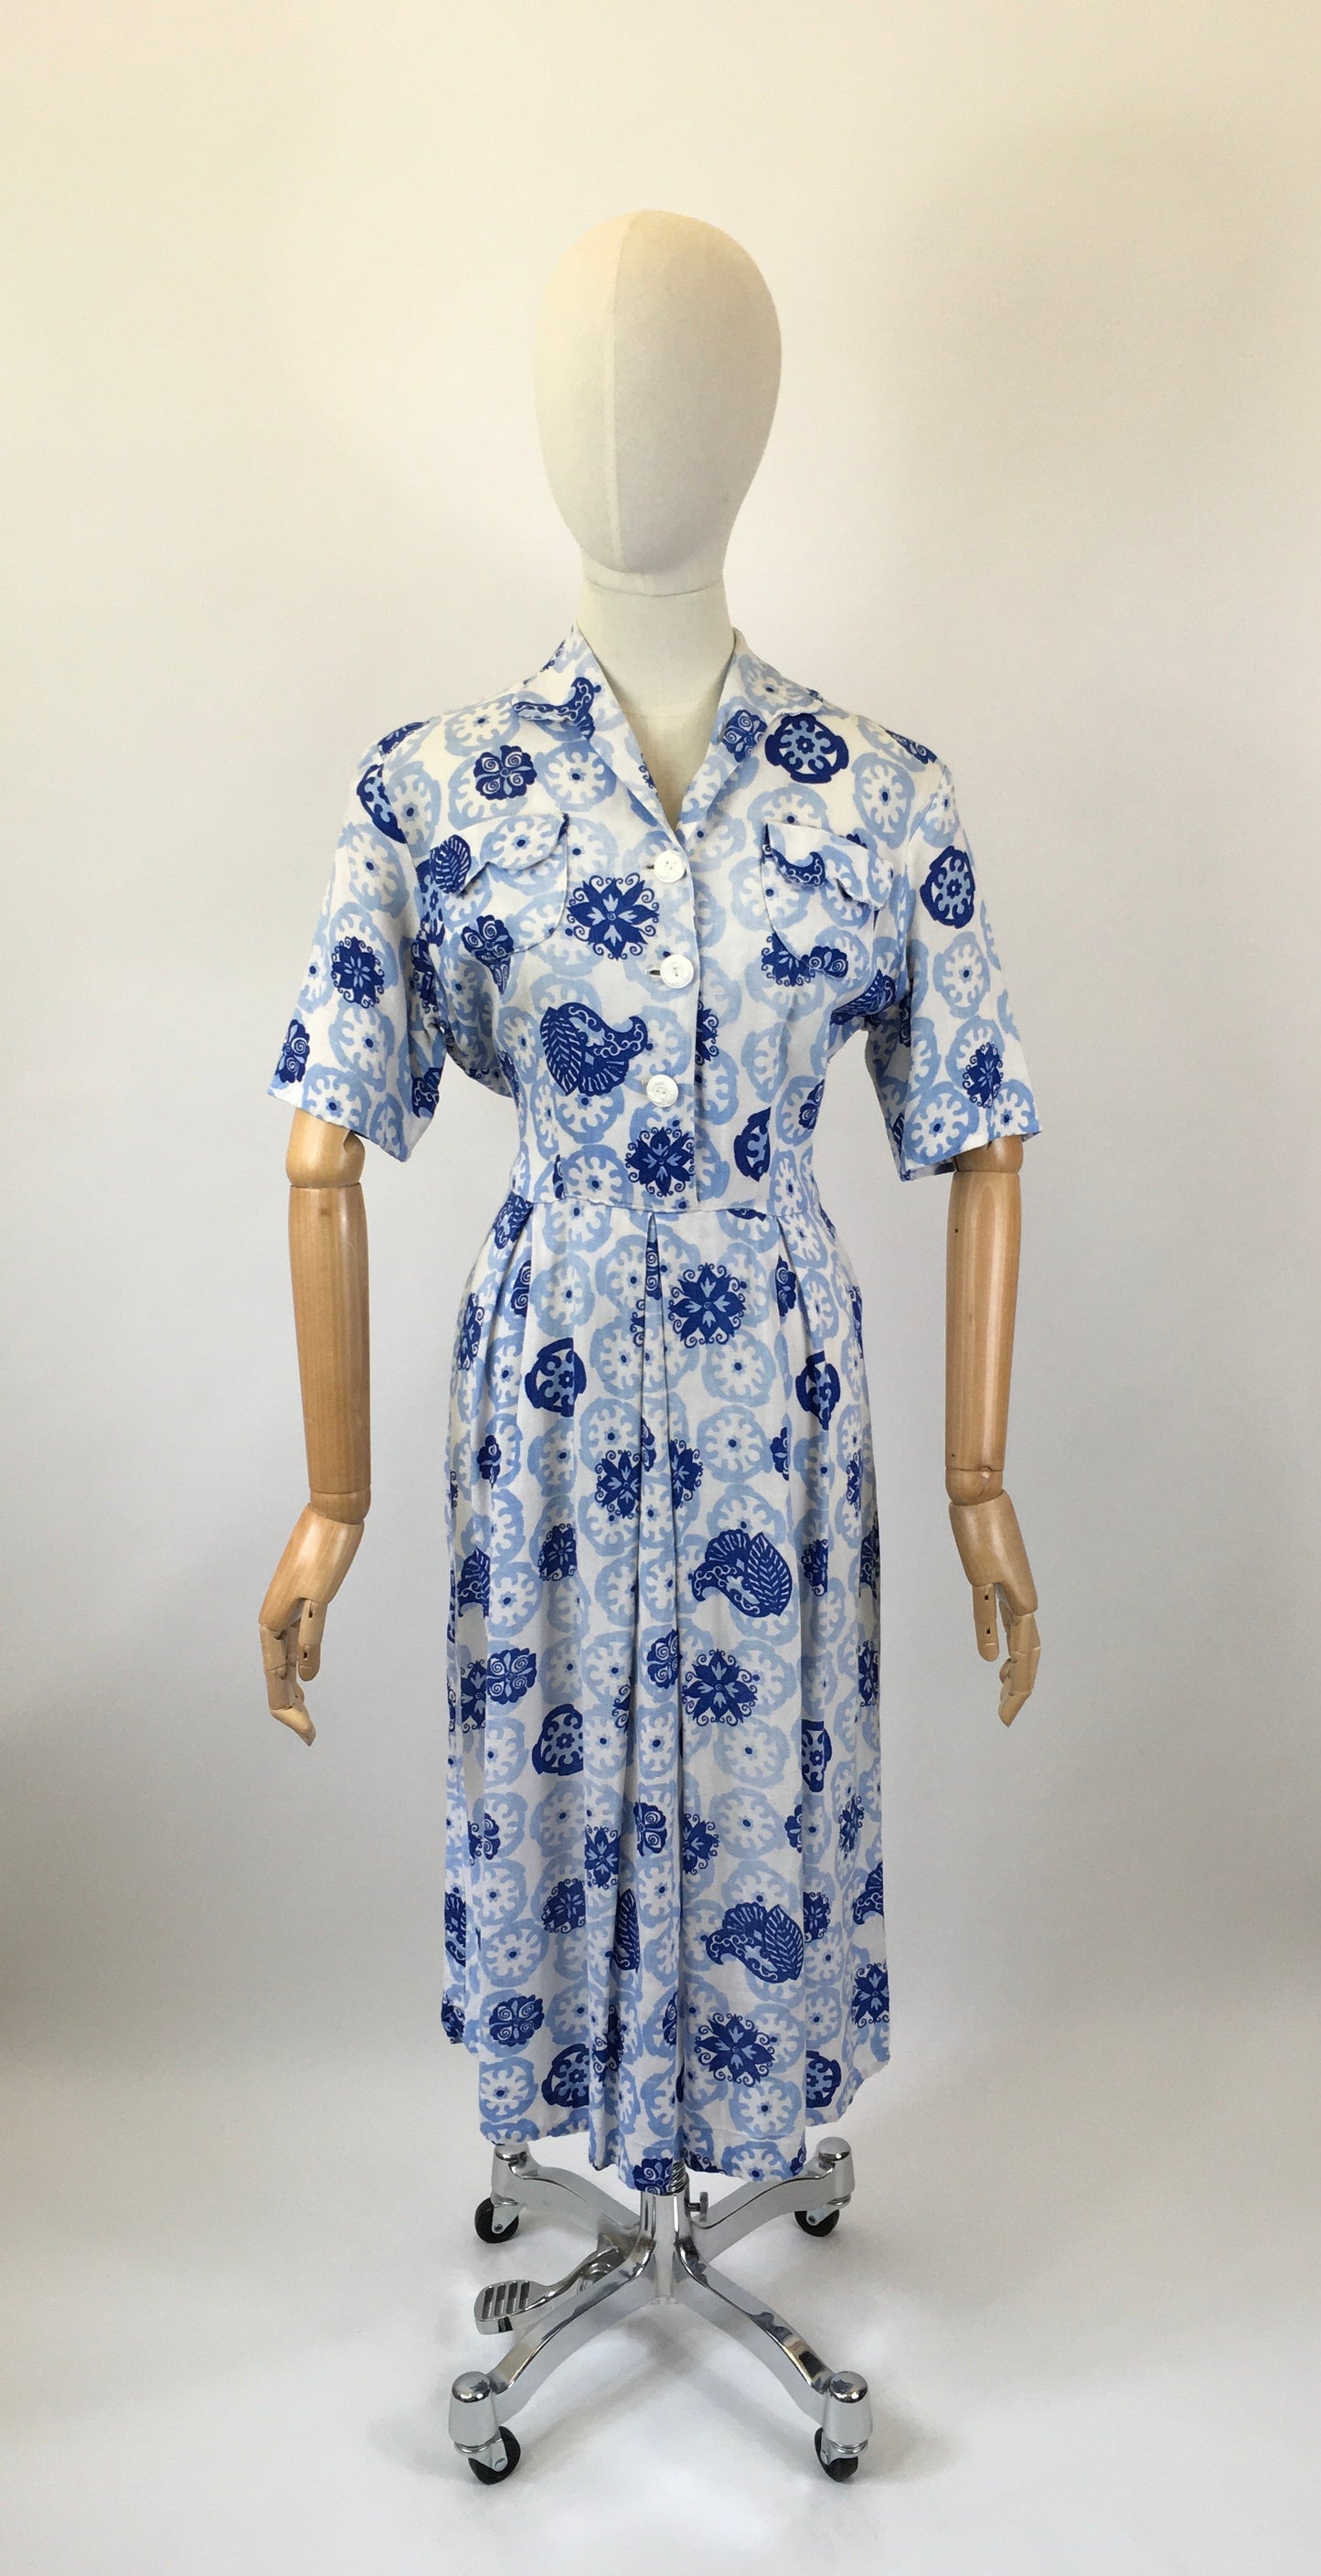 Original 1940's Stunning Day Dress - In A Beautiful Moygashol Linen in Navy and Powder Blue